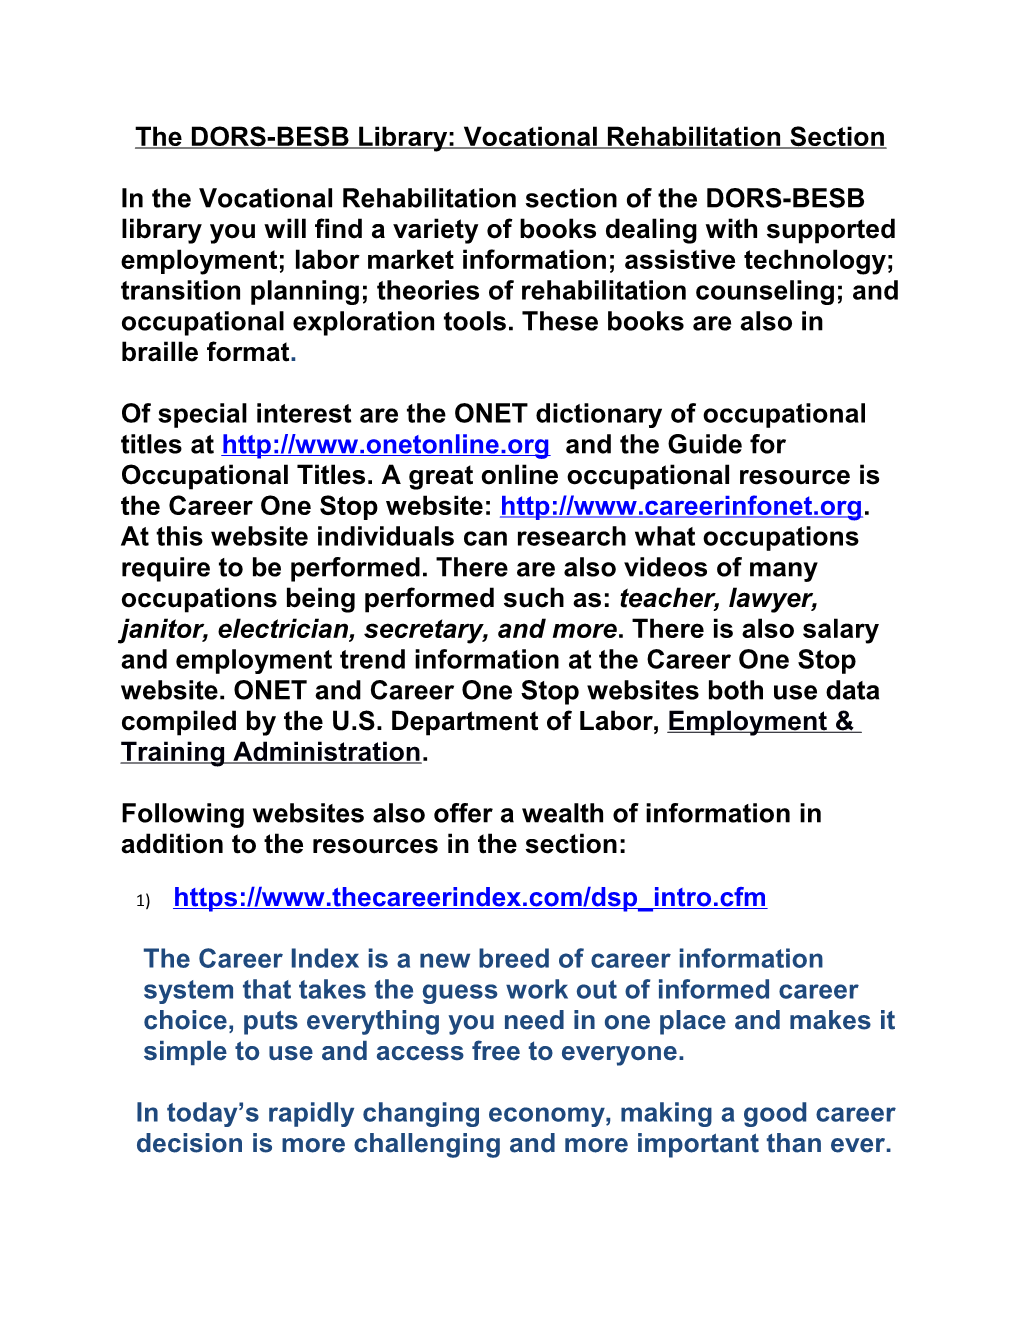 The DORS-BESB Library: Vocational Rehabilitation Section